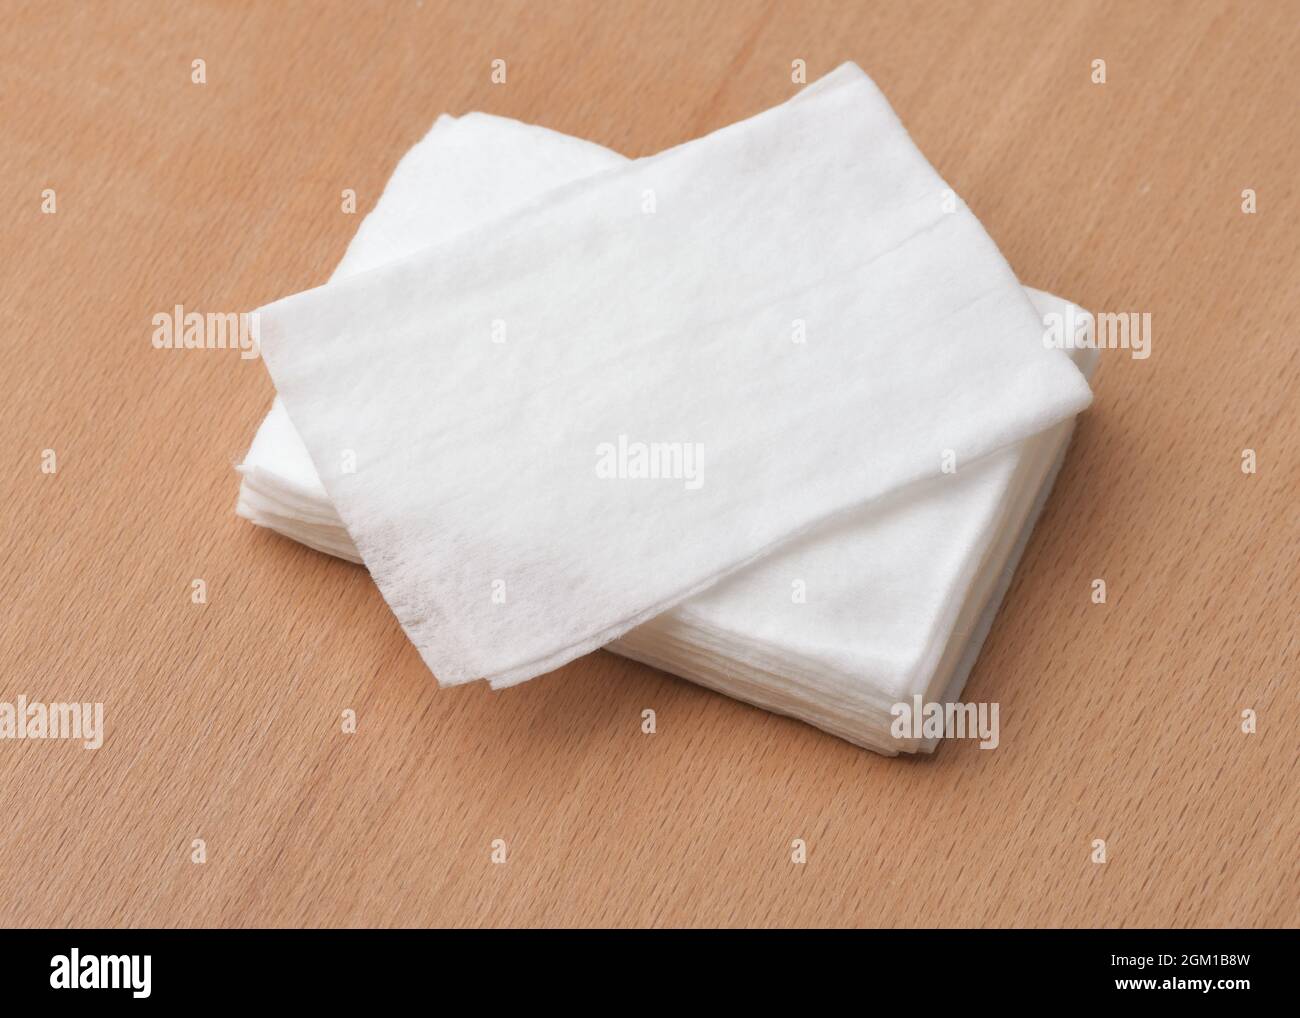 Closeup of unwrapped wet wipes stack on wooden table Stock Photo